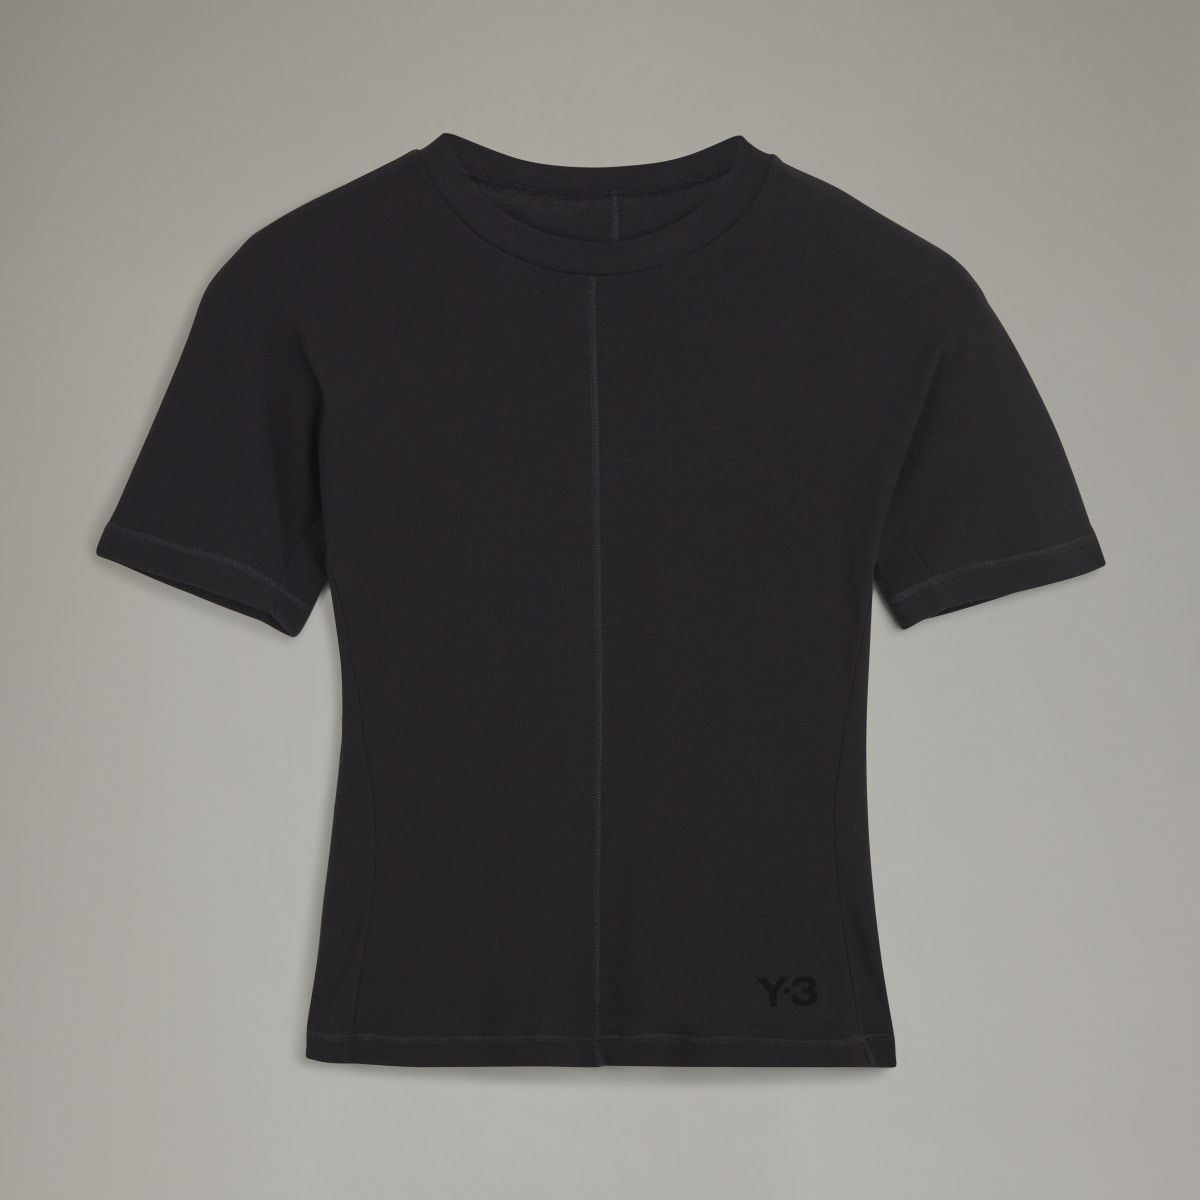 Adidas Y-3 Fitted Short Sleeve T-Shirt. 5